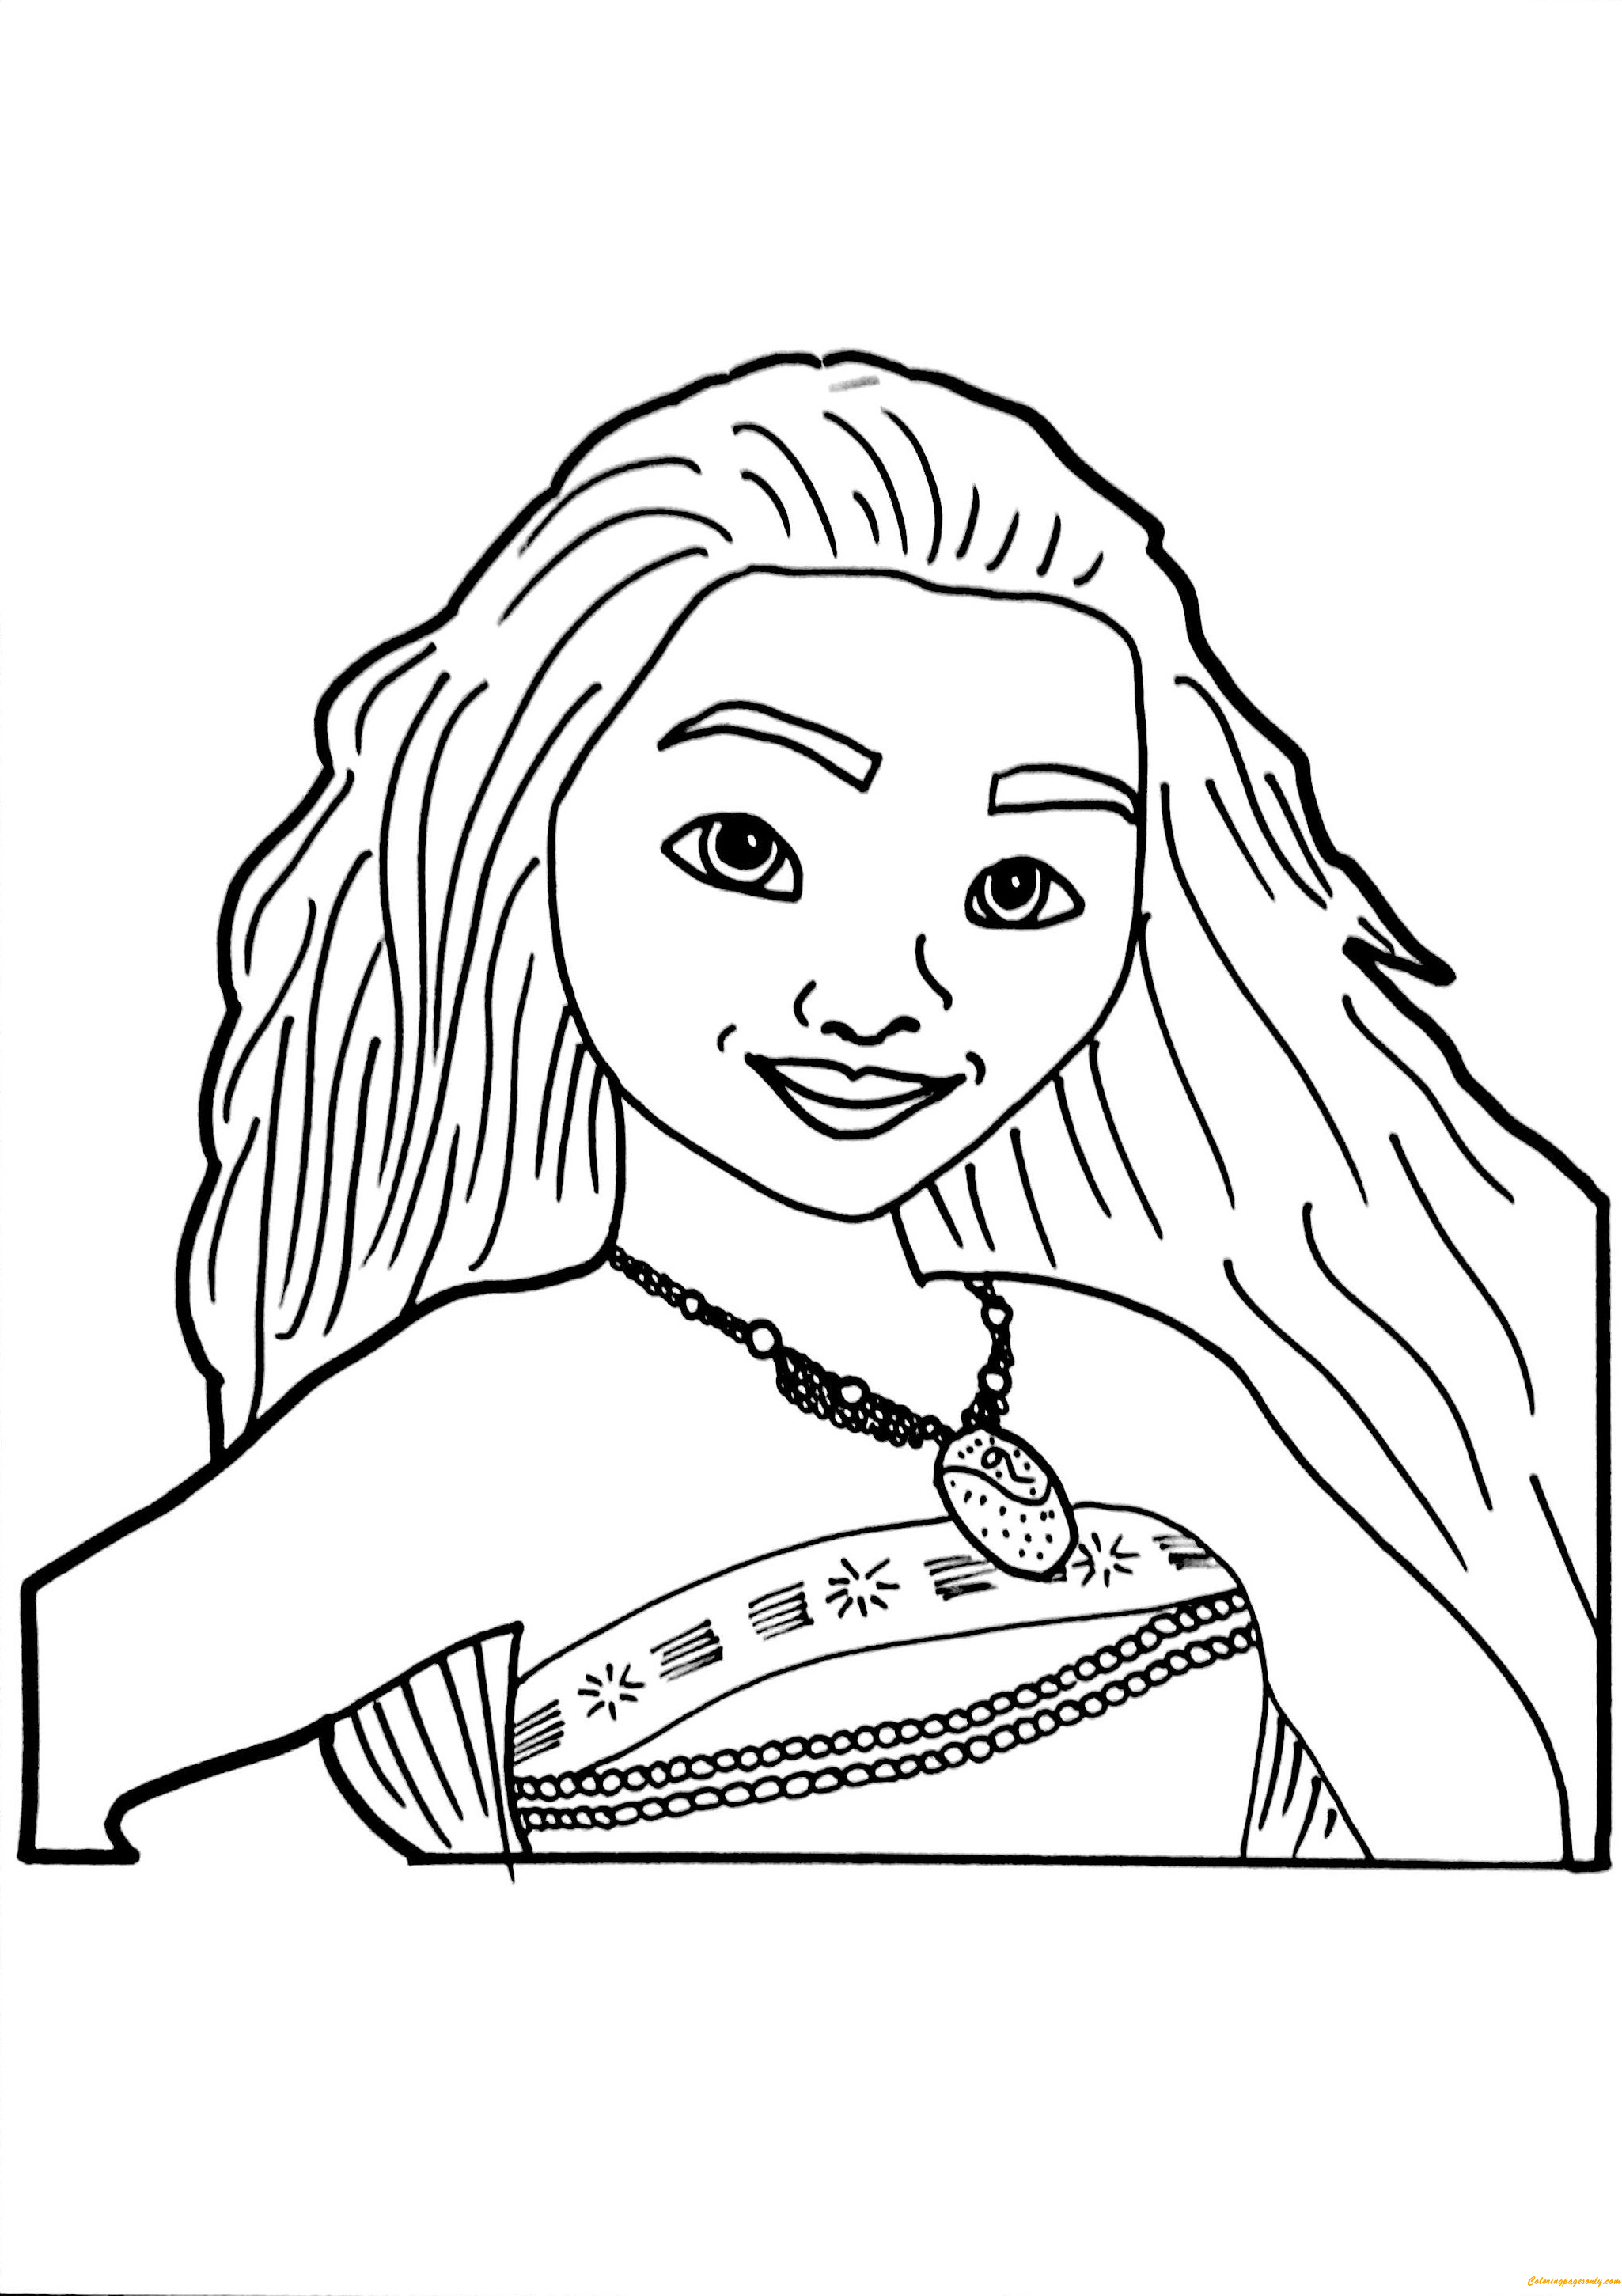 Disney Moana Coloring Pages